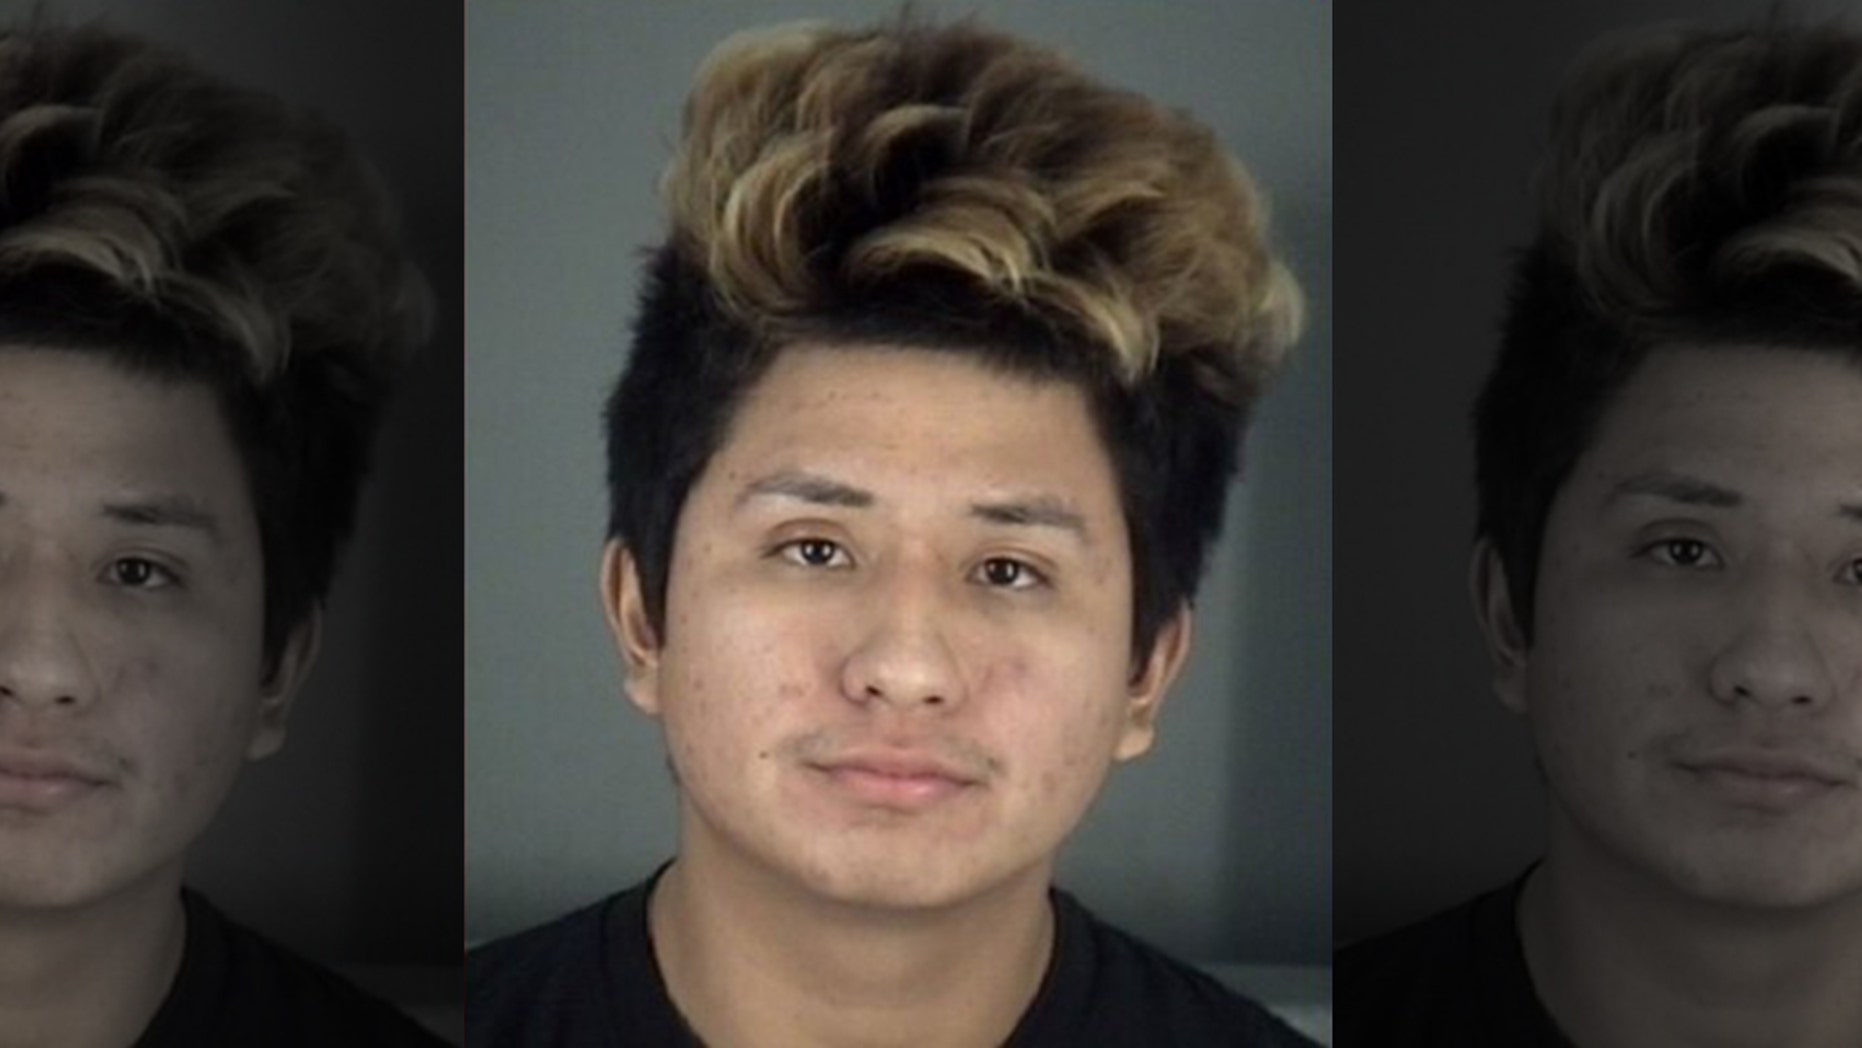   Daniel Fabian, 18, was arrested on Wednesday for allegedly raping a 15-year-old girl while taking a break after playing a video game.